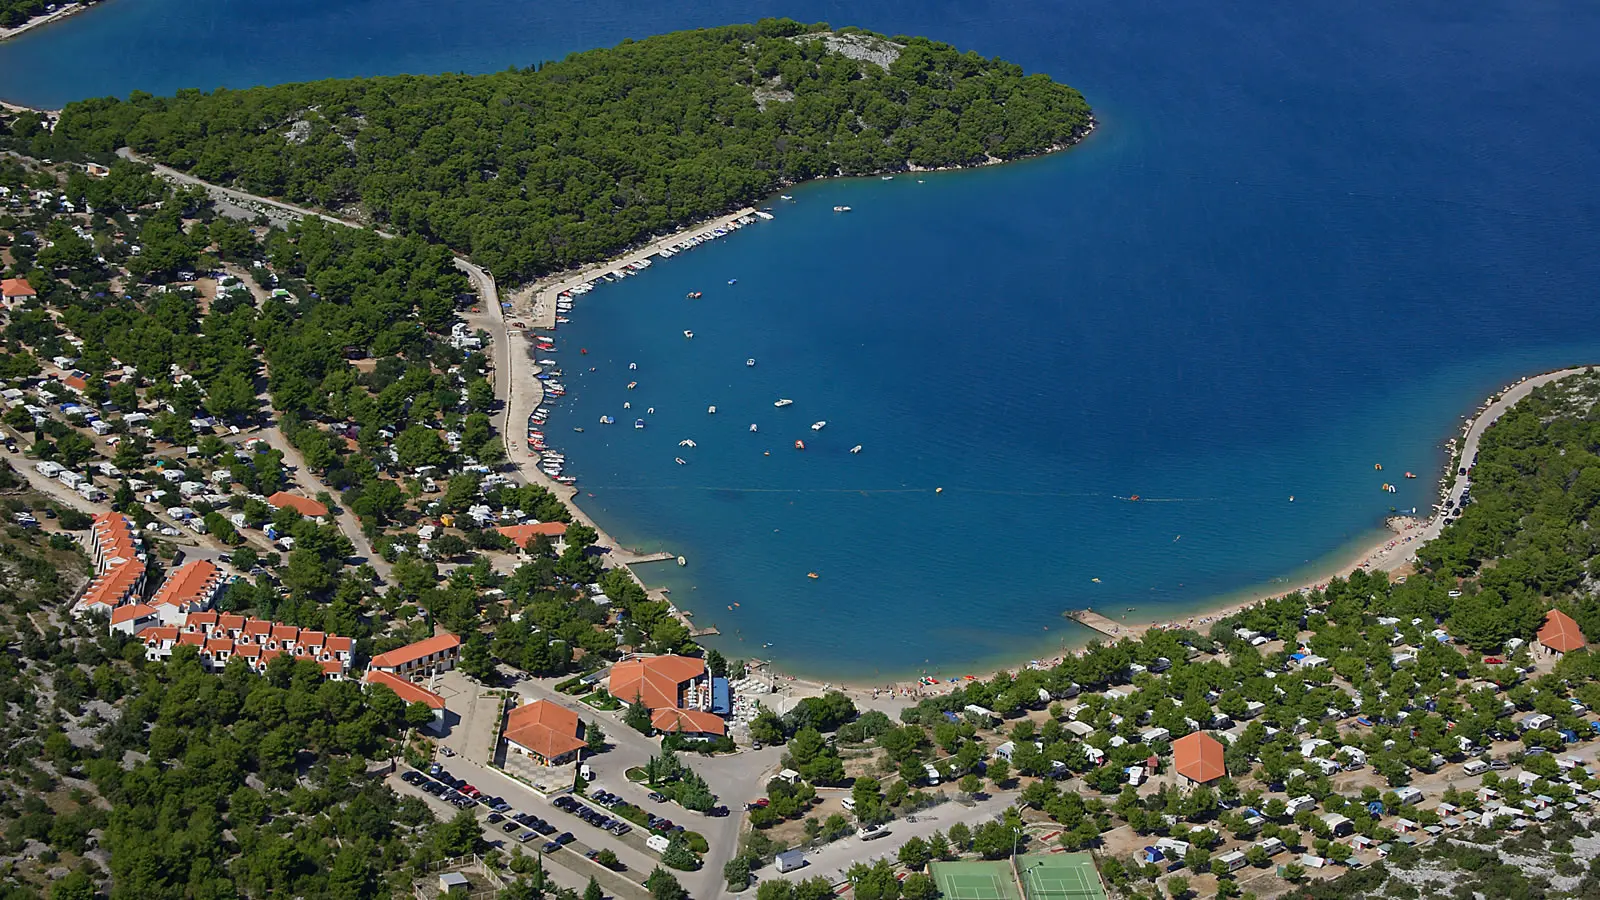 Aerial view of Jezera holiday resort in Murter, featuring a crescent-shaped beach lined with boats, mobile homes nestled in greenery, and clear blue waters.